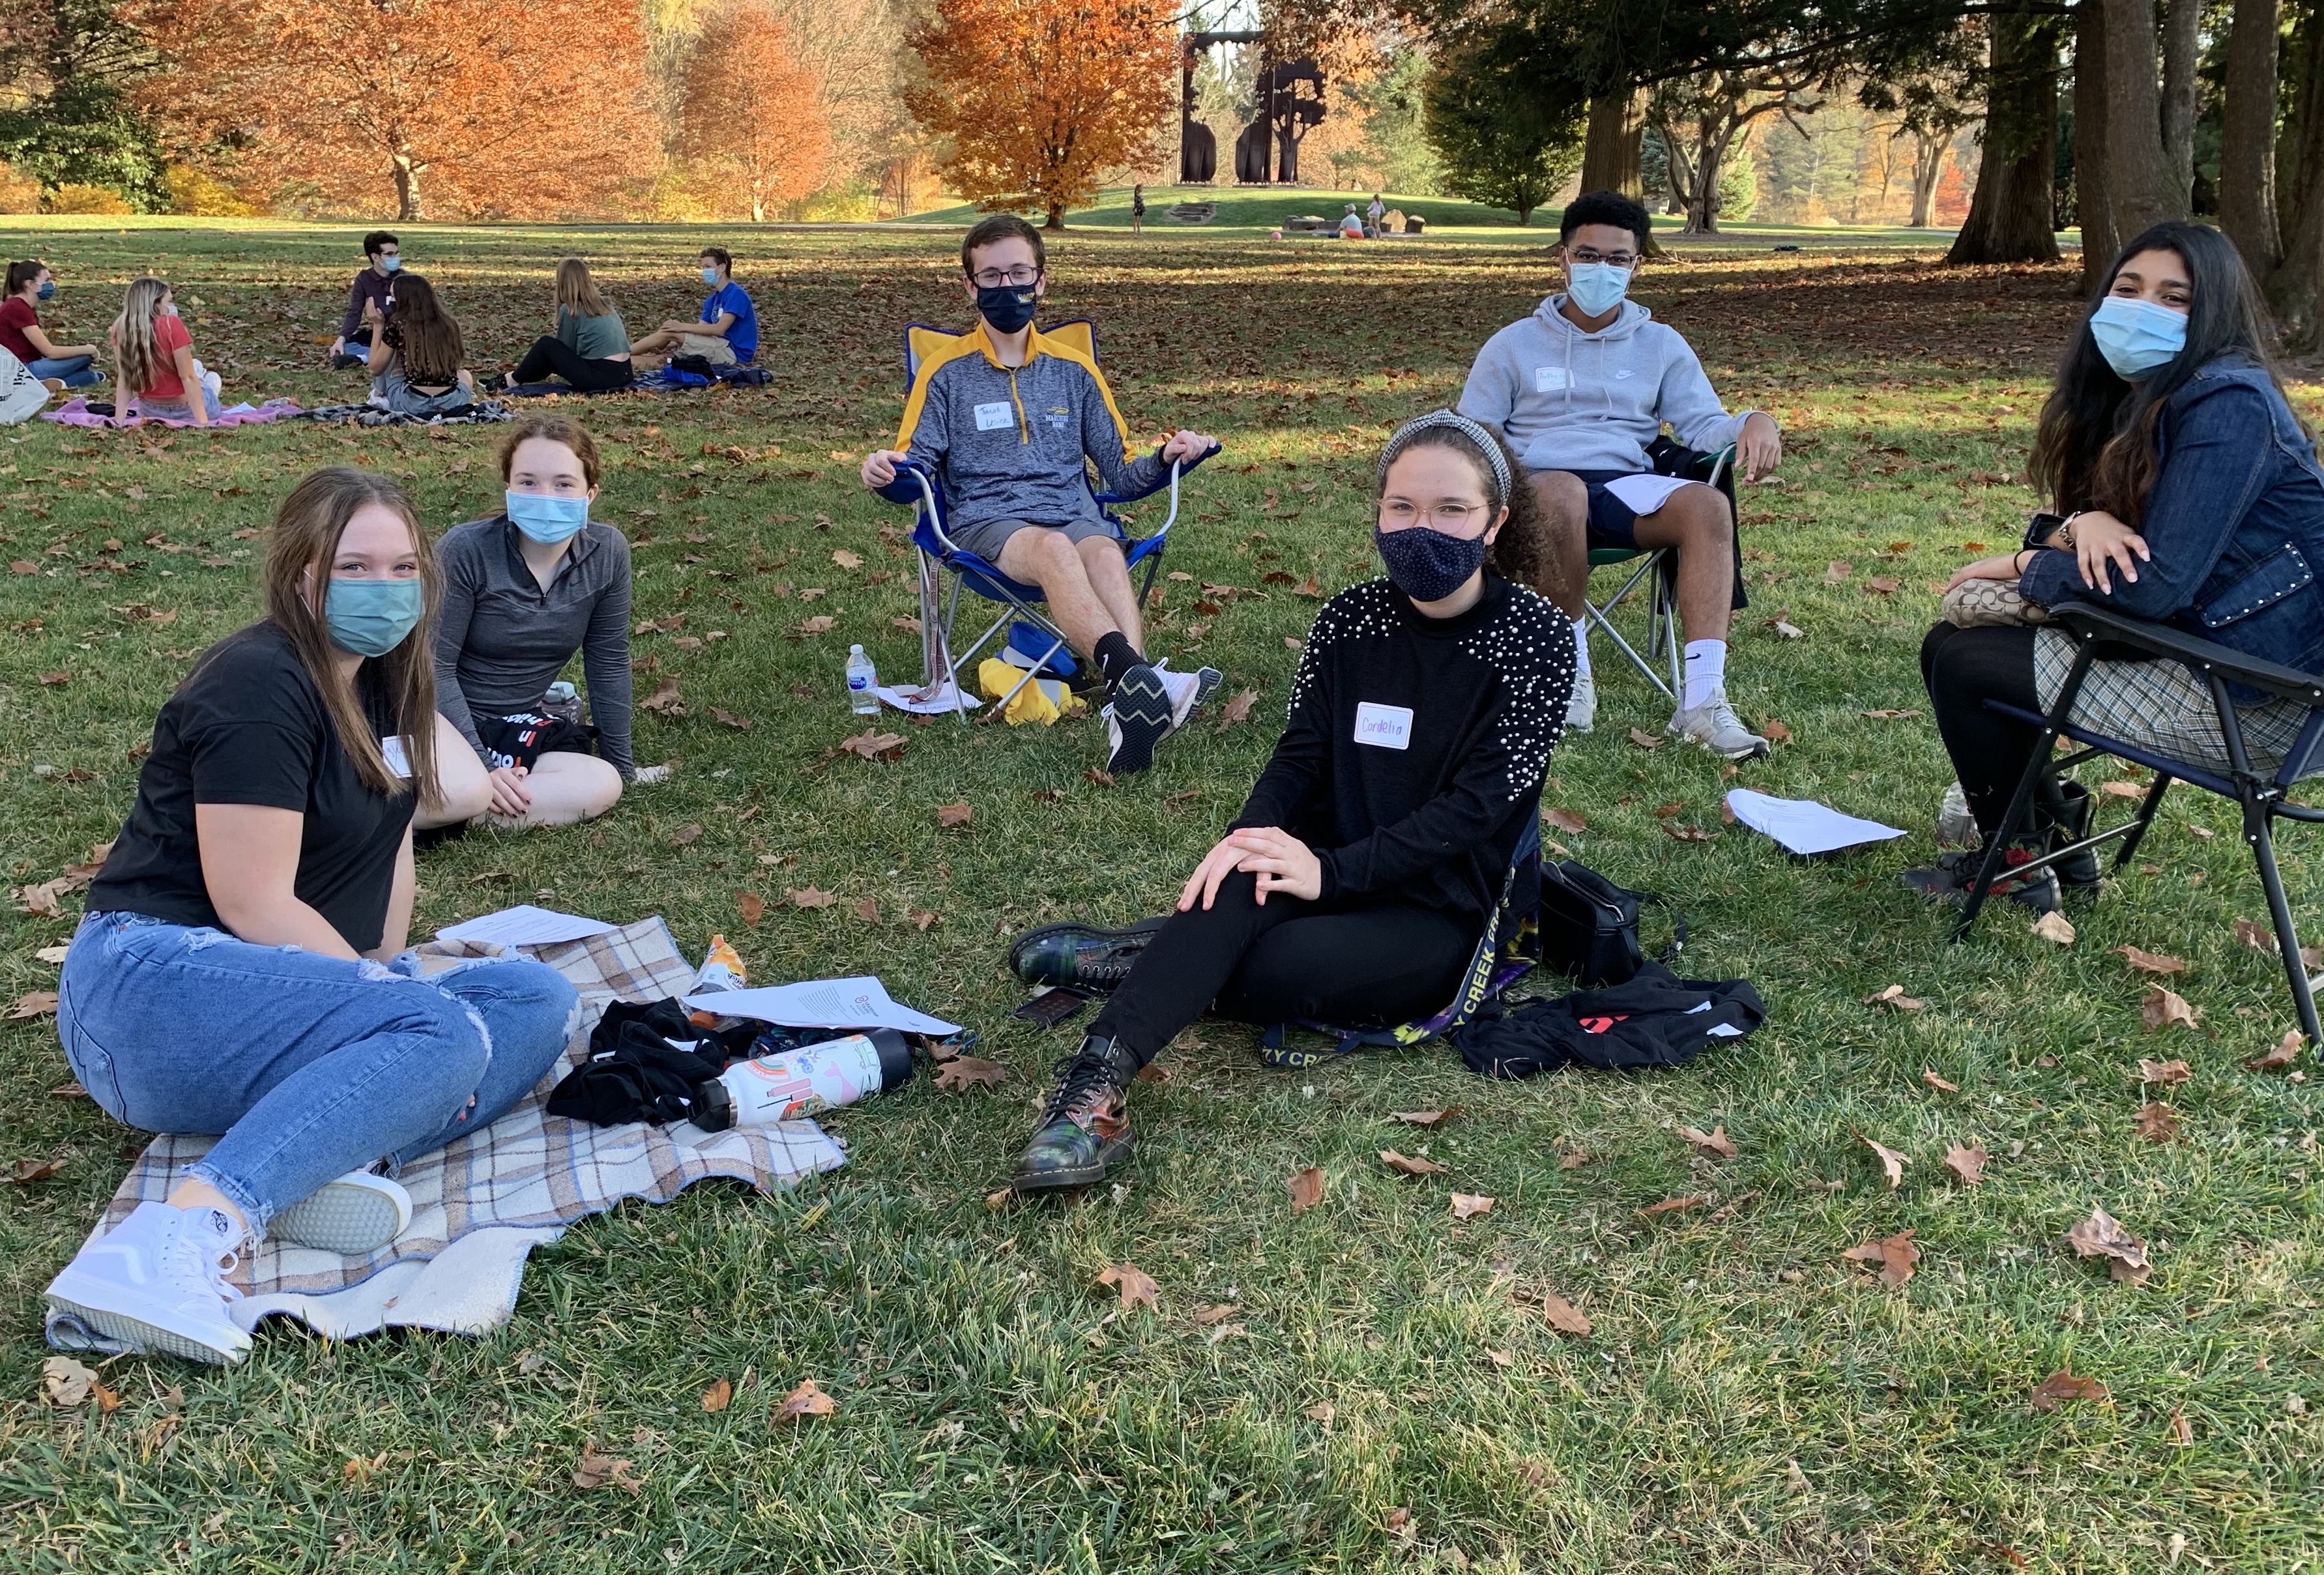 Students in face masks smile at the camera while sitting outside on an autumn day